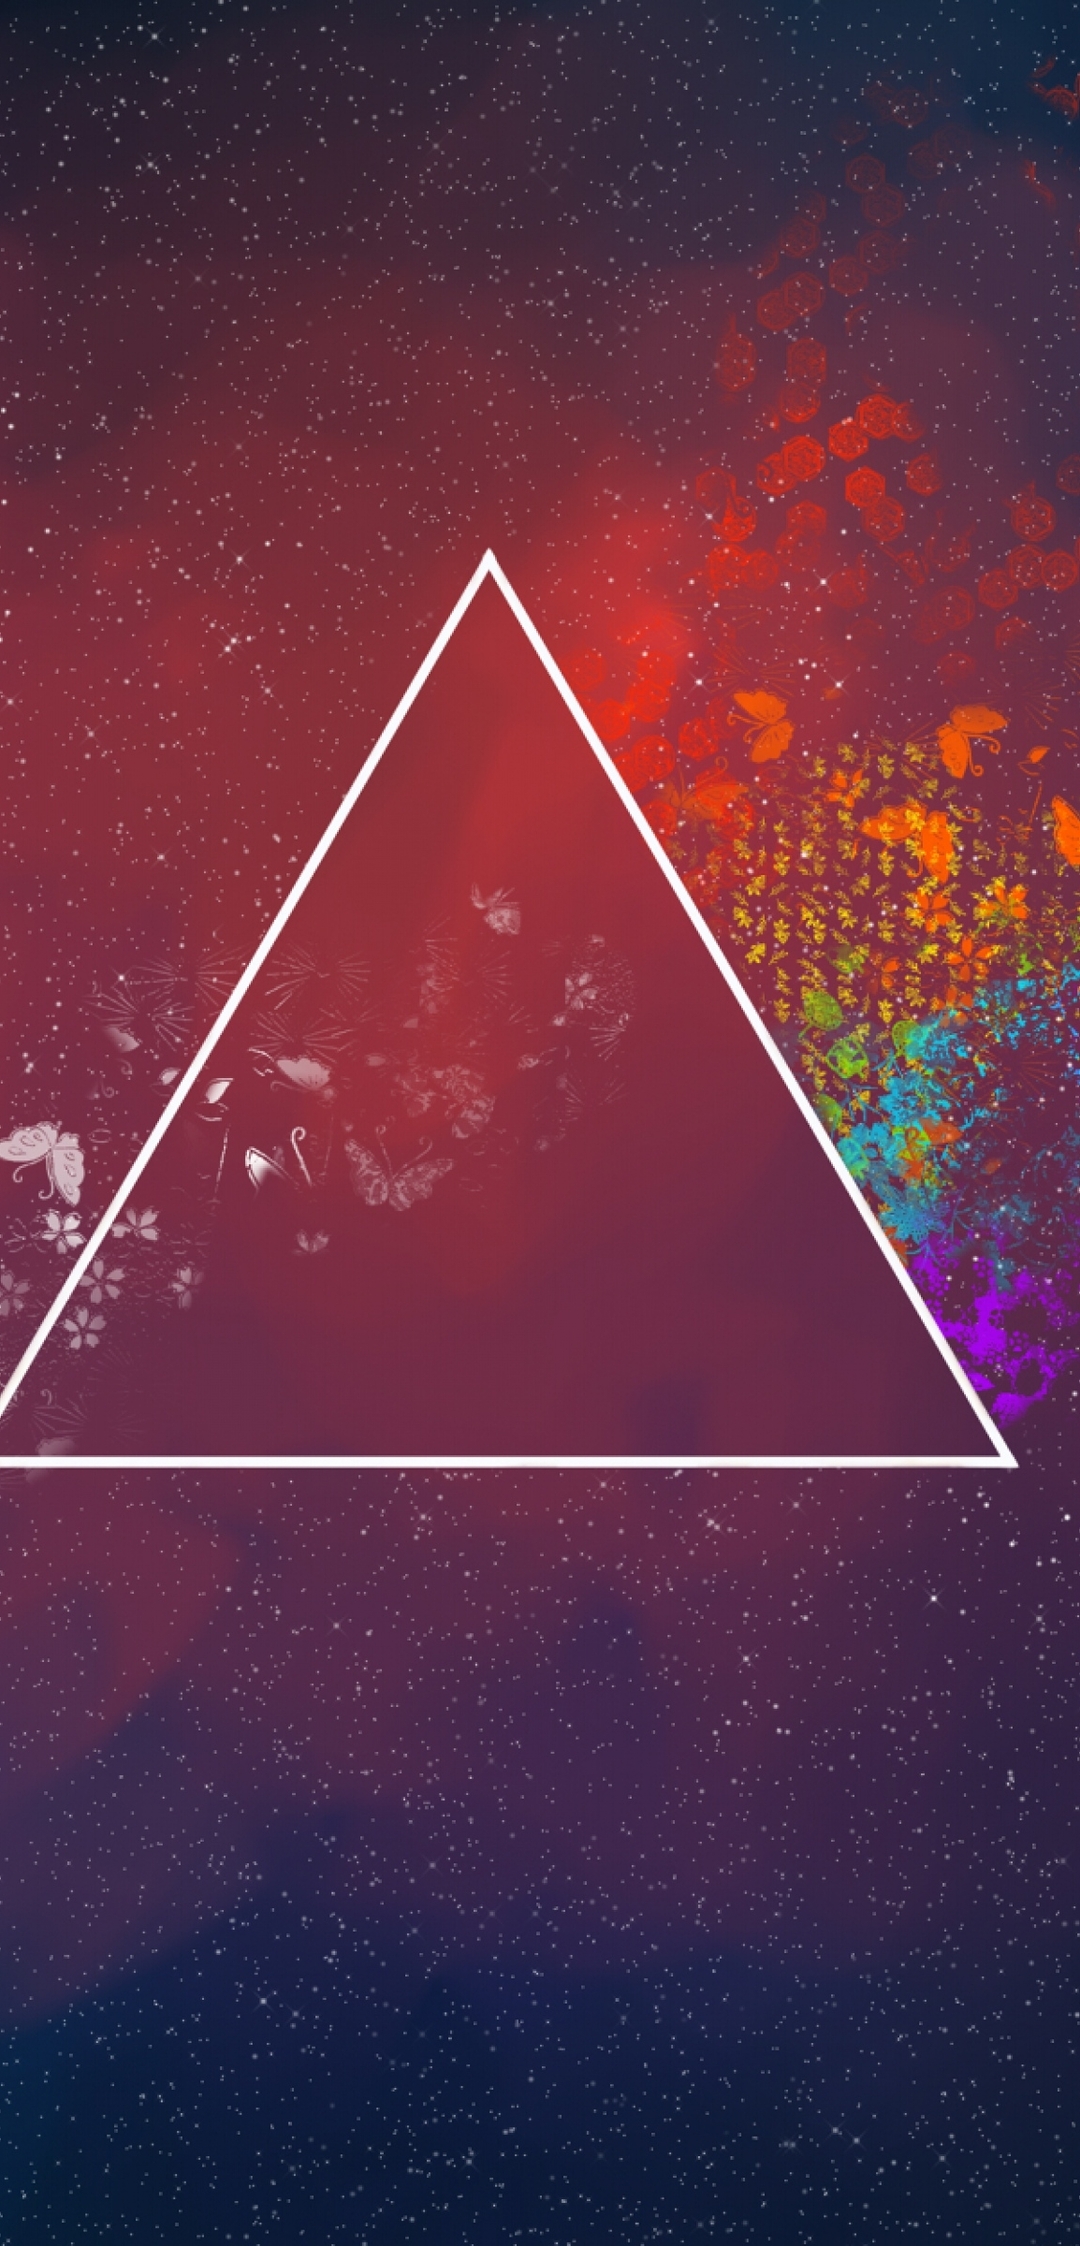 Image: Triangle, angles, butterflies, flowers, stars, paint